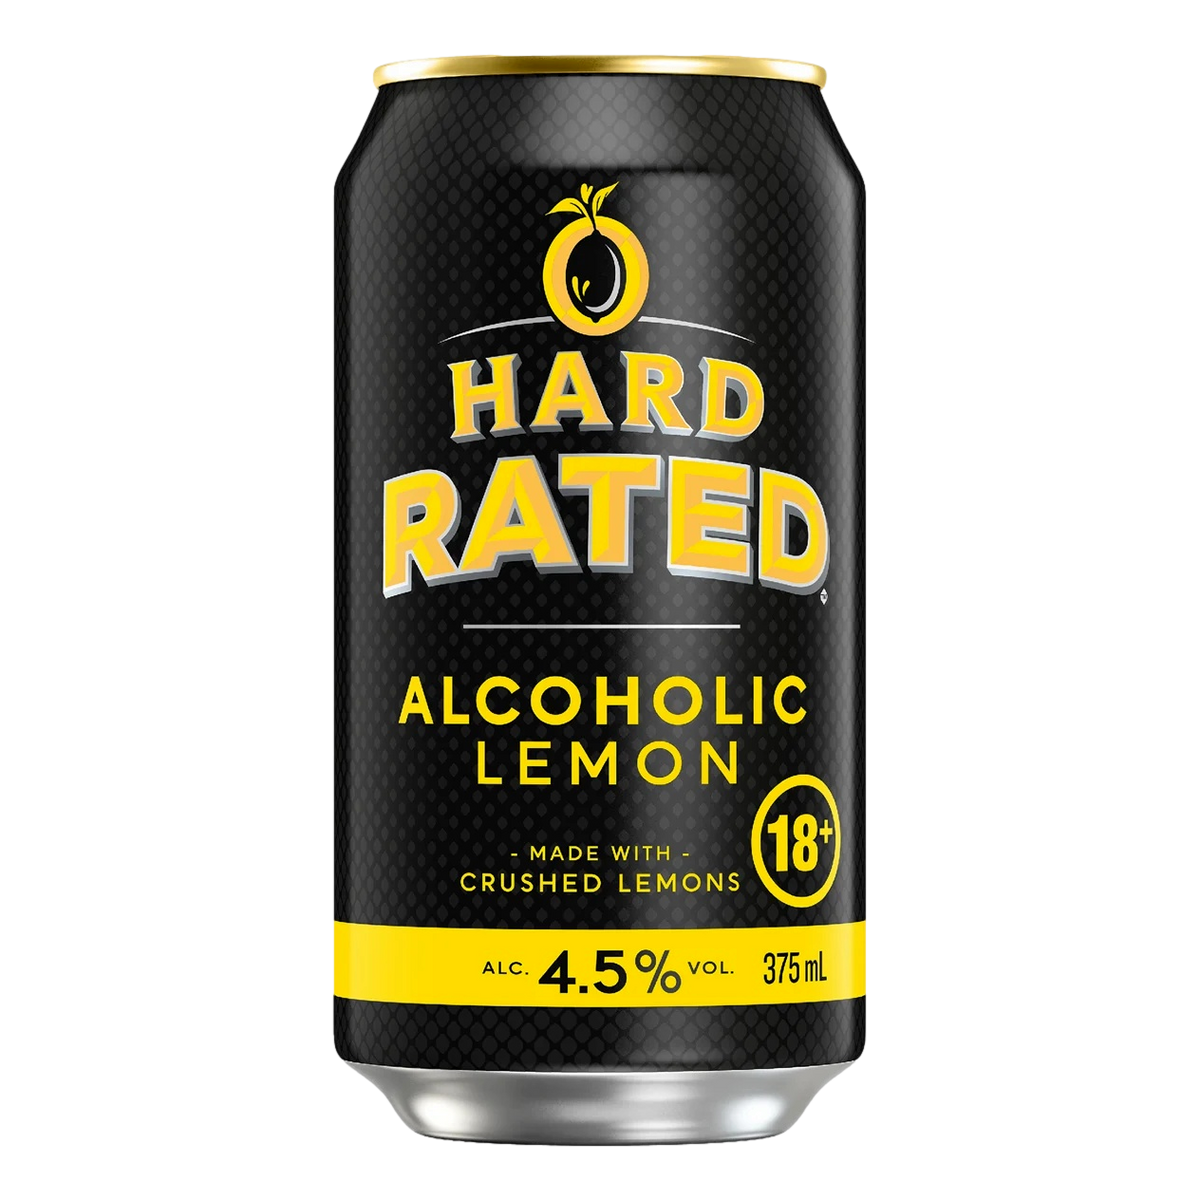 Hard Solo: Why are people concerned about a new alcoholic soft